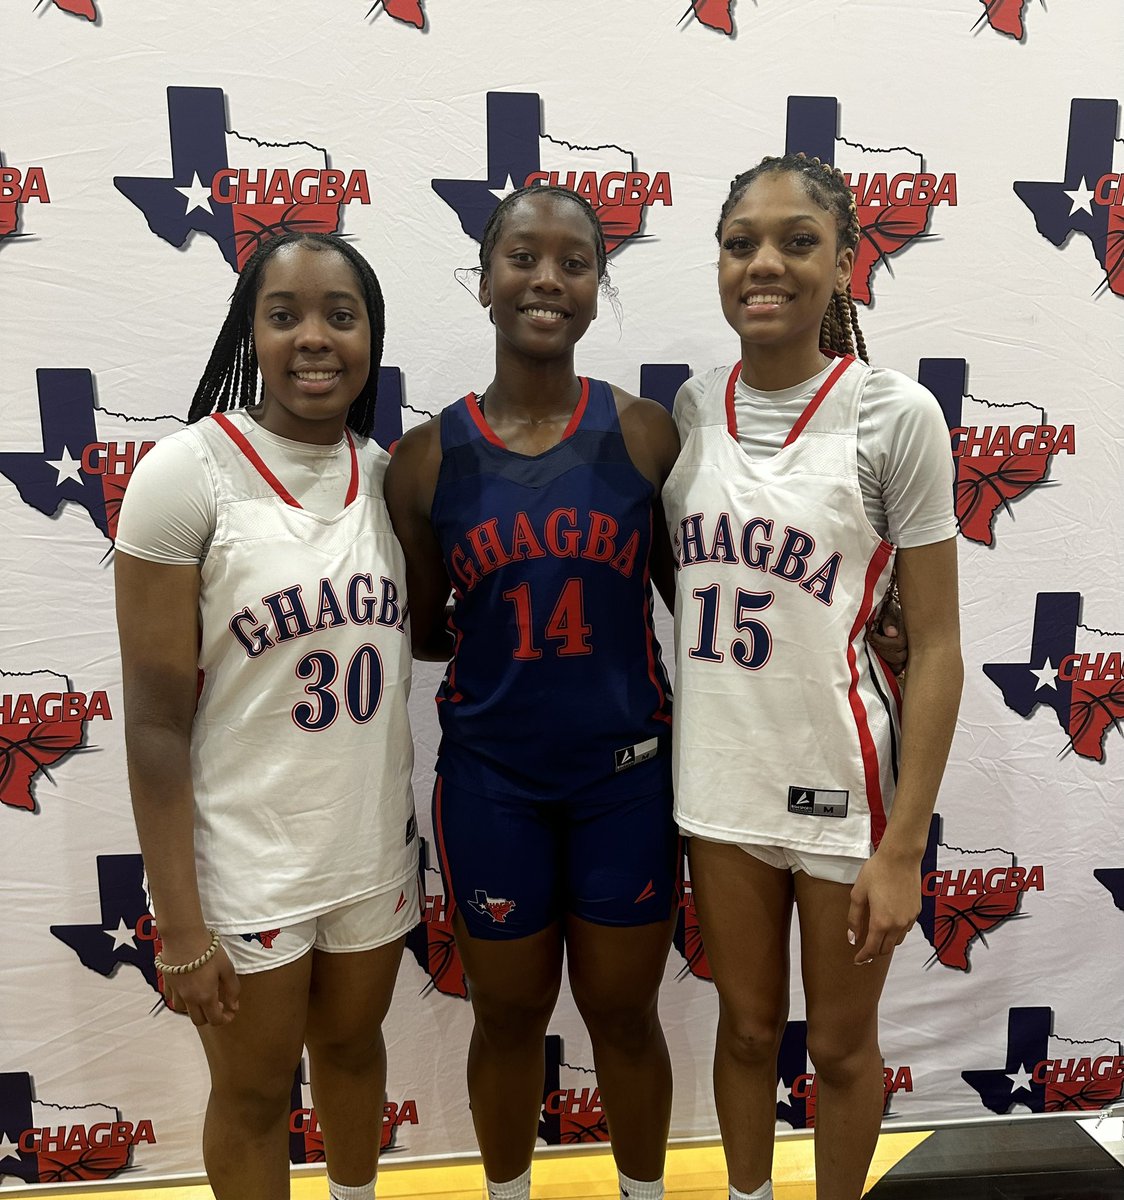 It was great to see #KISD represent at the @GHAGBA all star game. Congrats to @khloe_vaughn @CallensChristin @Camryn_beck15 on a job well done. @KleinISDAth @KleinISD @KC_Coach_Lee @kcainladyhoops @KOLadyHoops